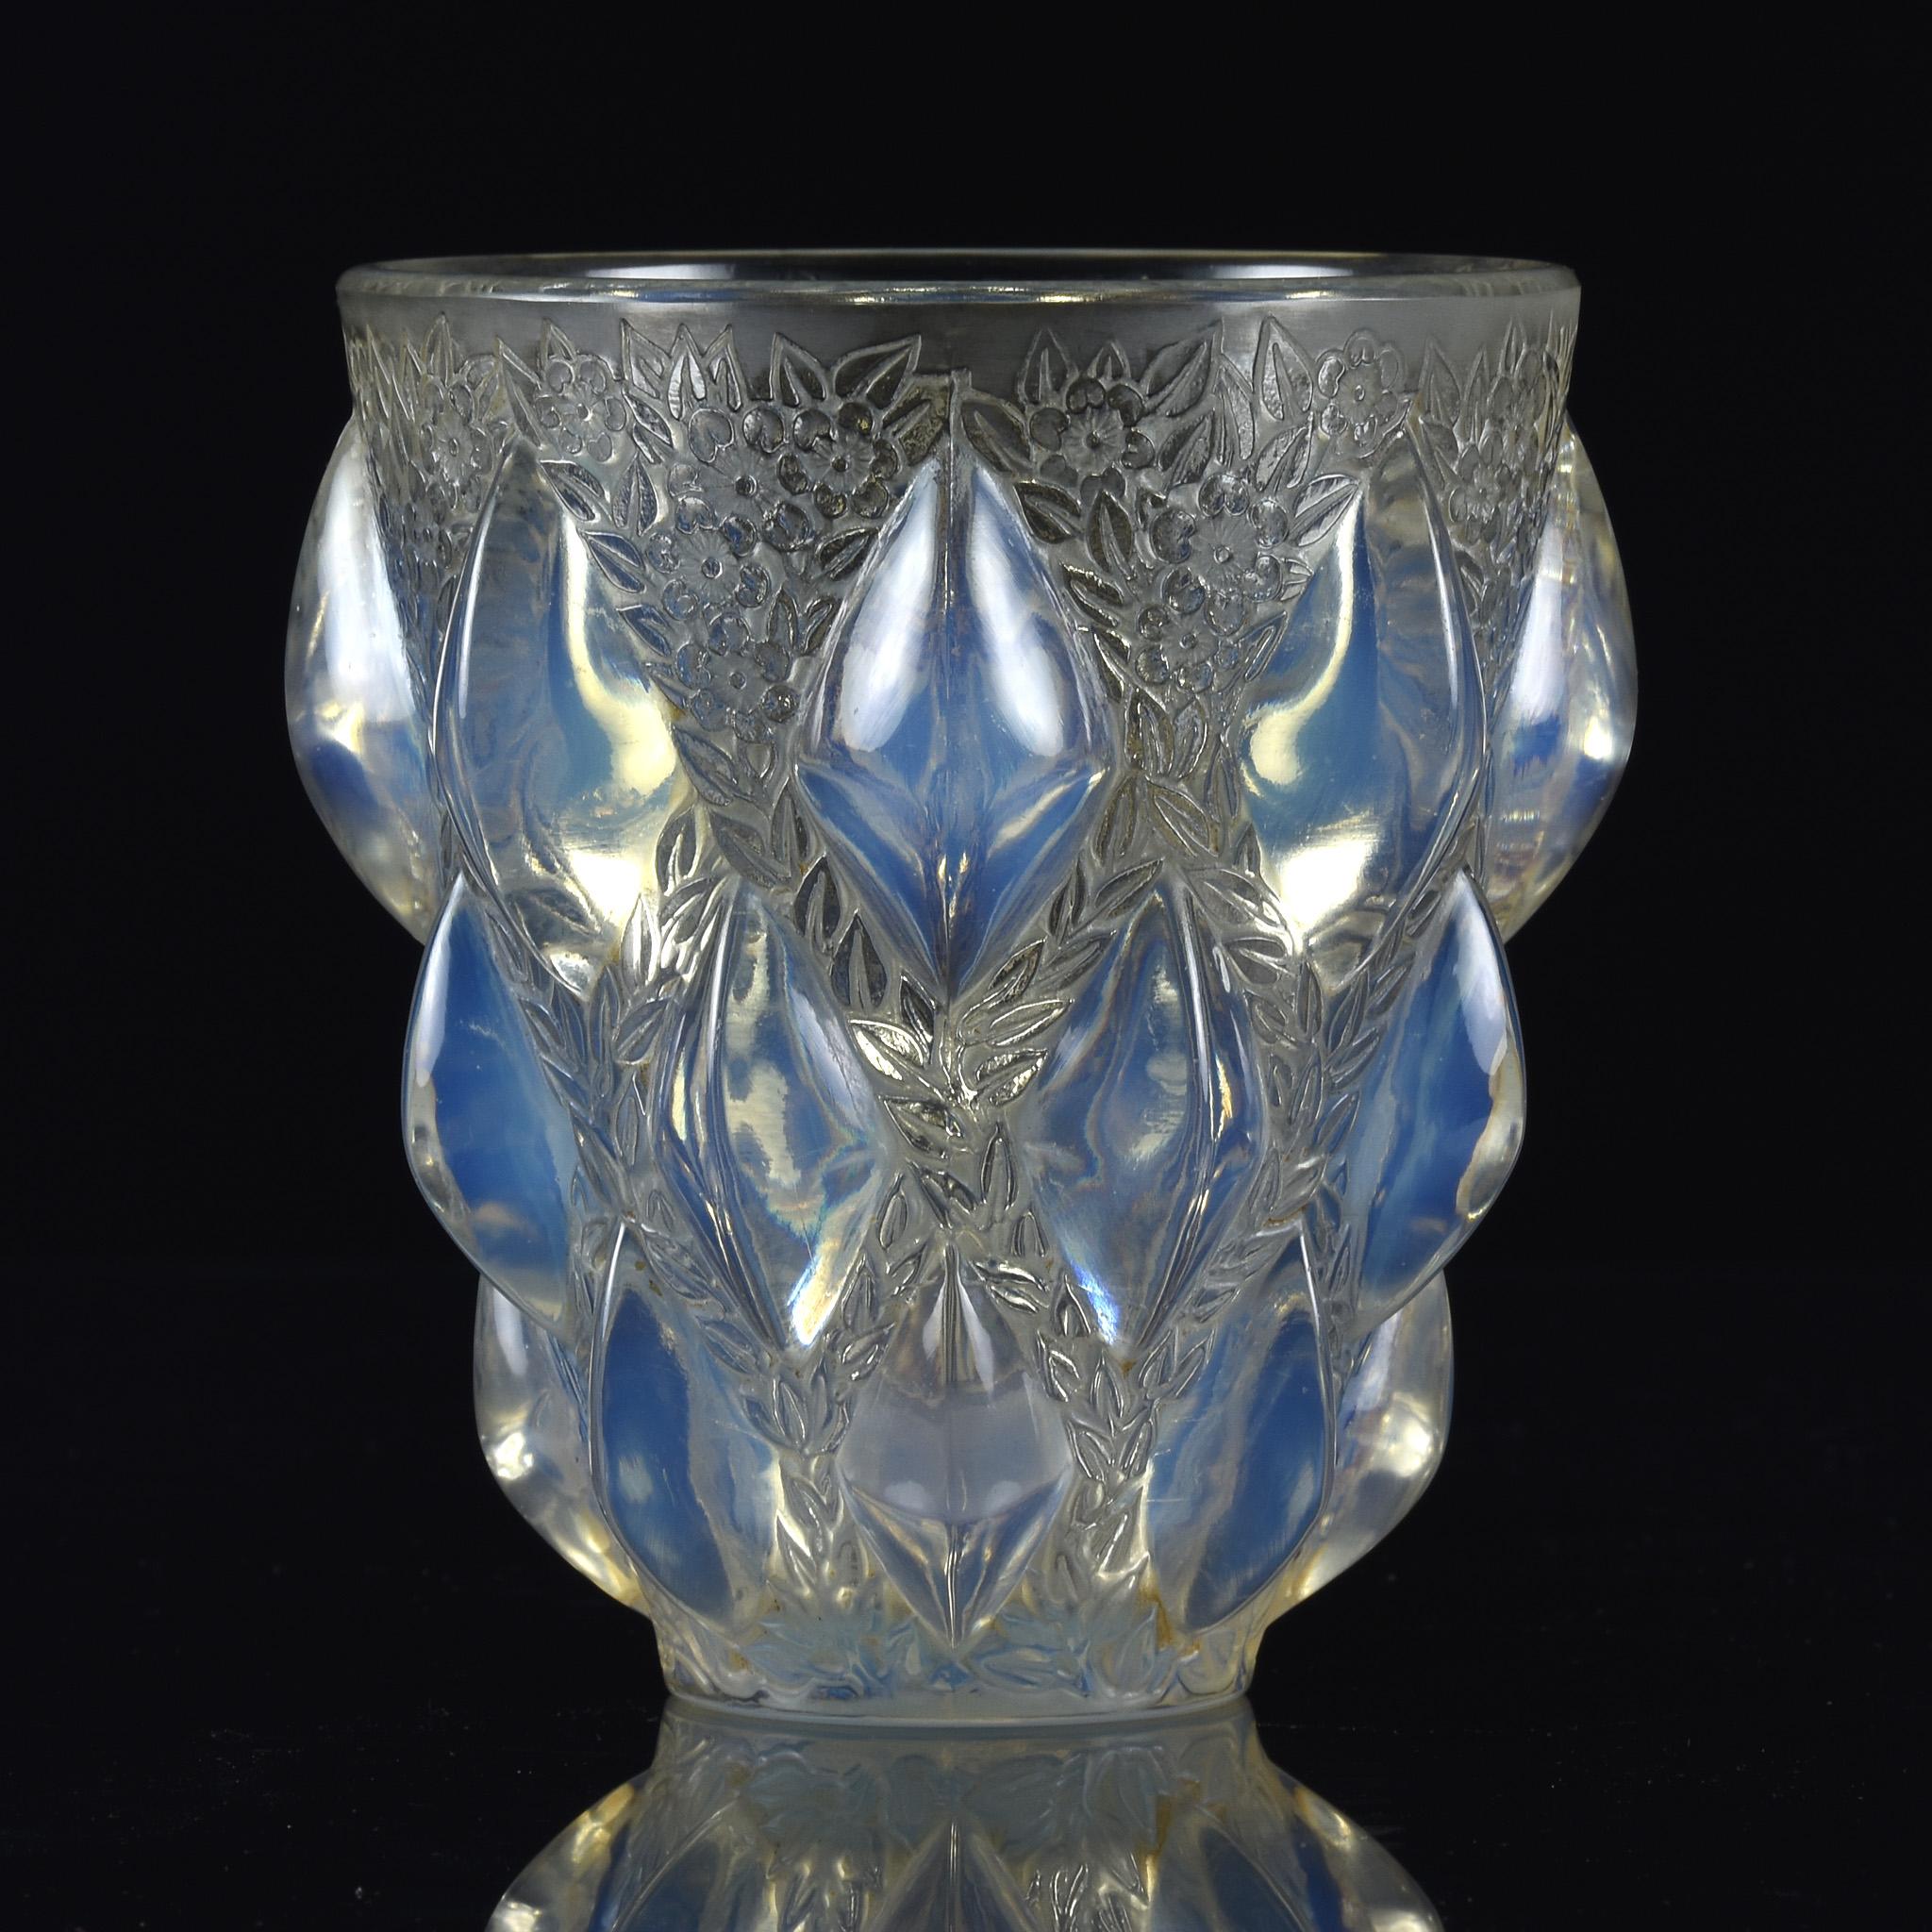 An exciting clear, frosted and opalescent Art Deco glass vase with raised lozenge pattern interspersed with flowering branches heightened with light staining, signed to base R Lalique France
 
Rampillon
Catalogue Number: 991
Signature